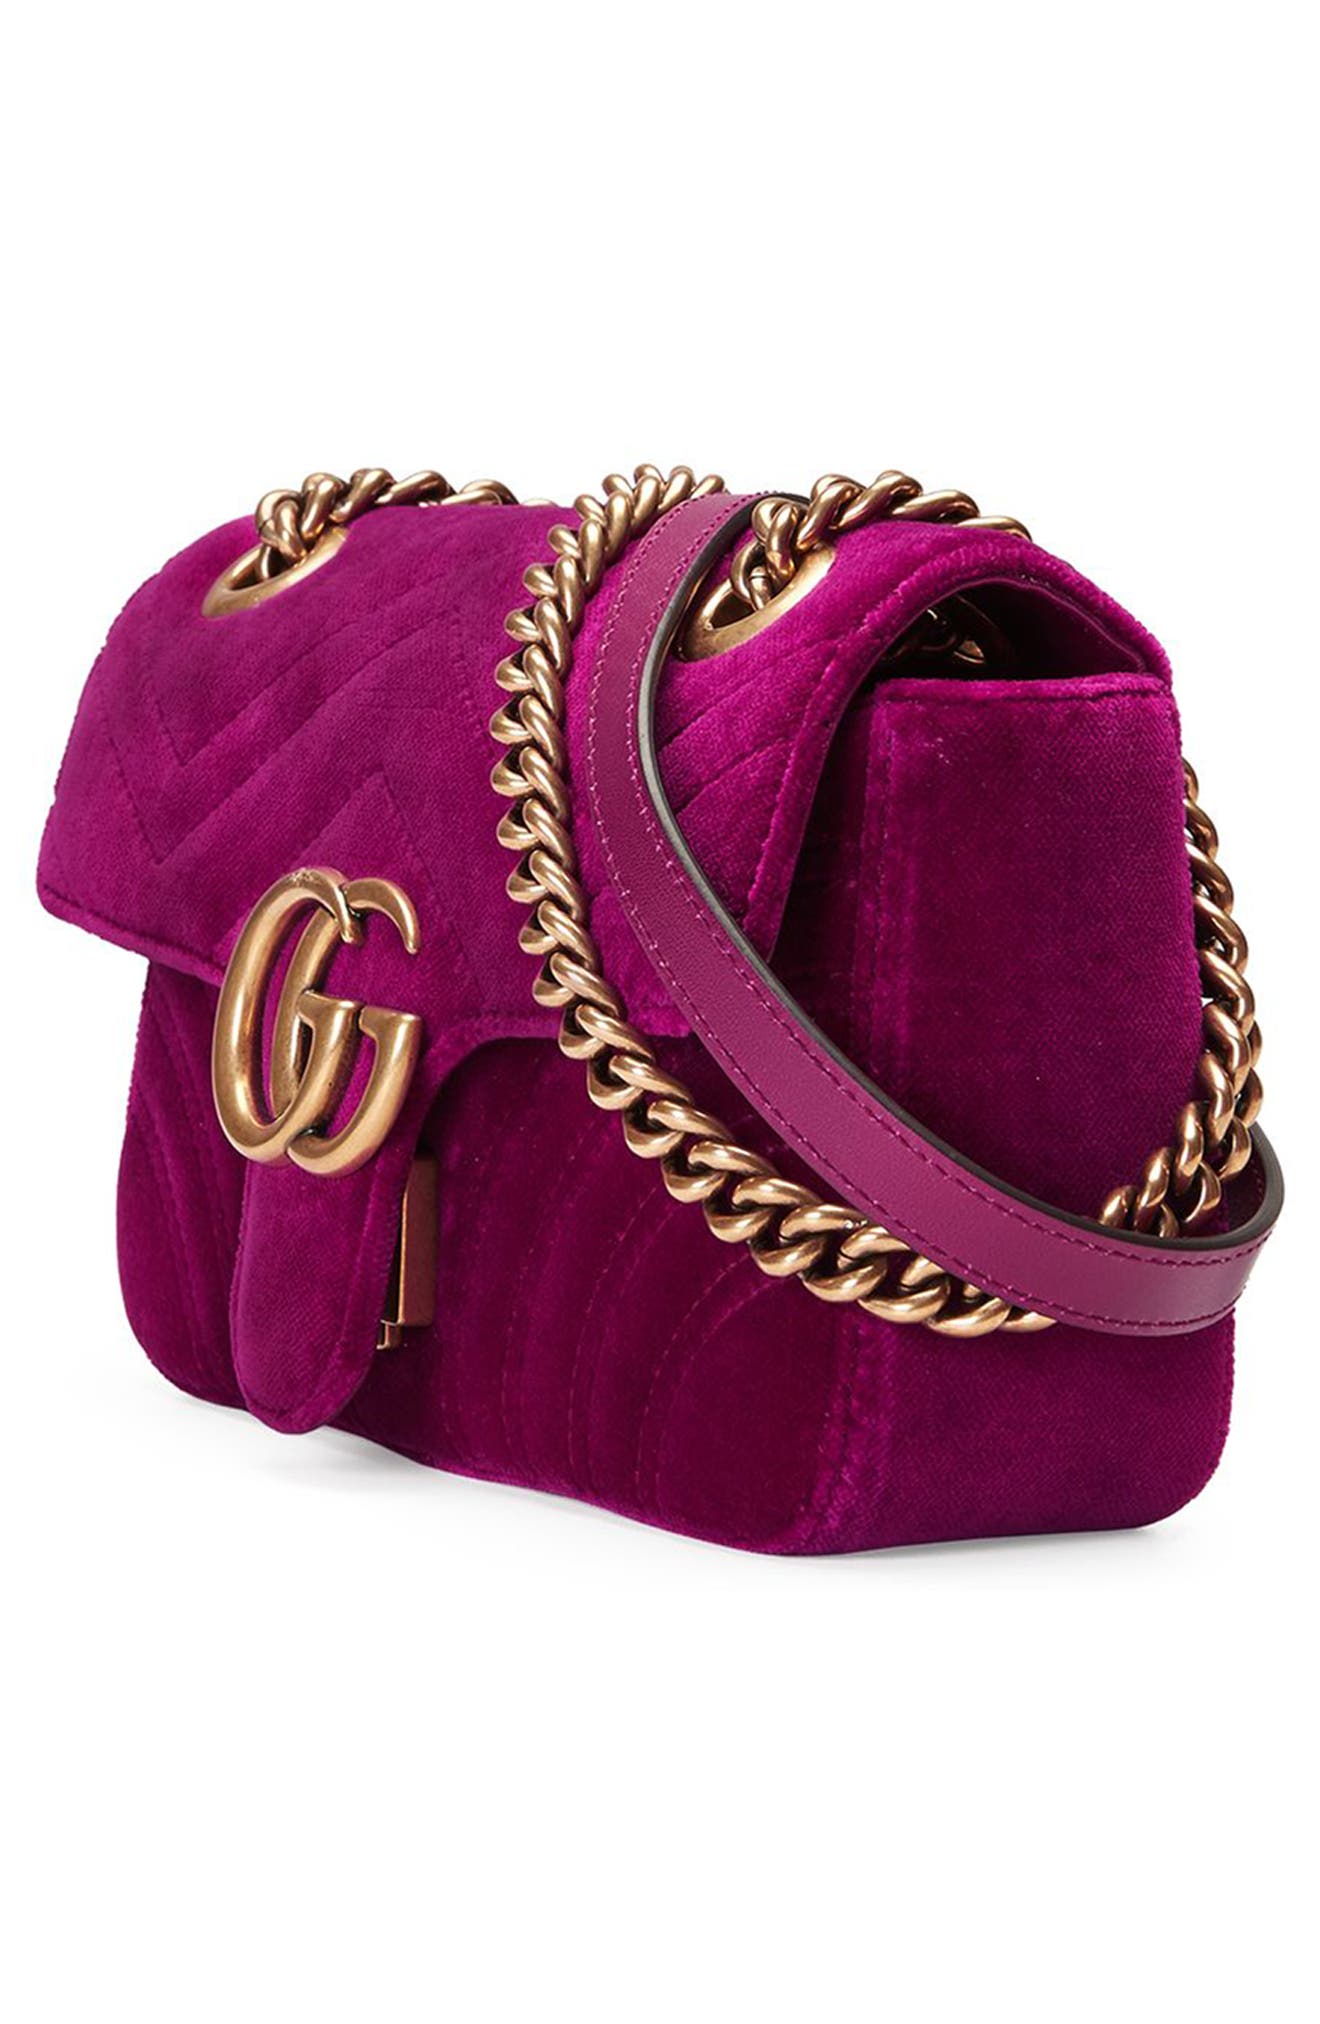 GUCCI GG MARMONT 2.0 SUEDE SHOULDER BAG, FUCHSIA , RED/BROWN | ModeSens